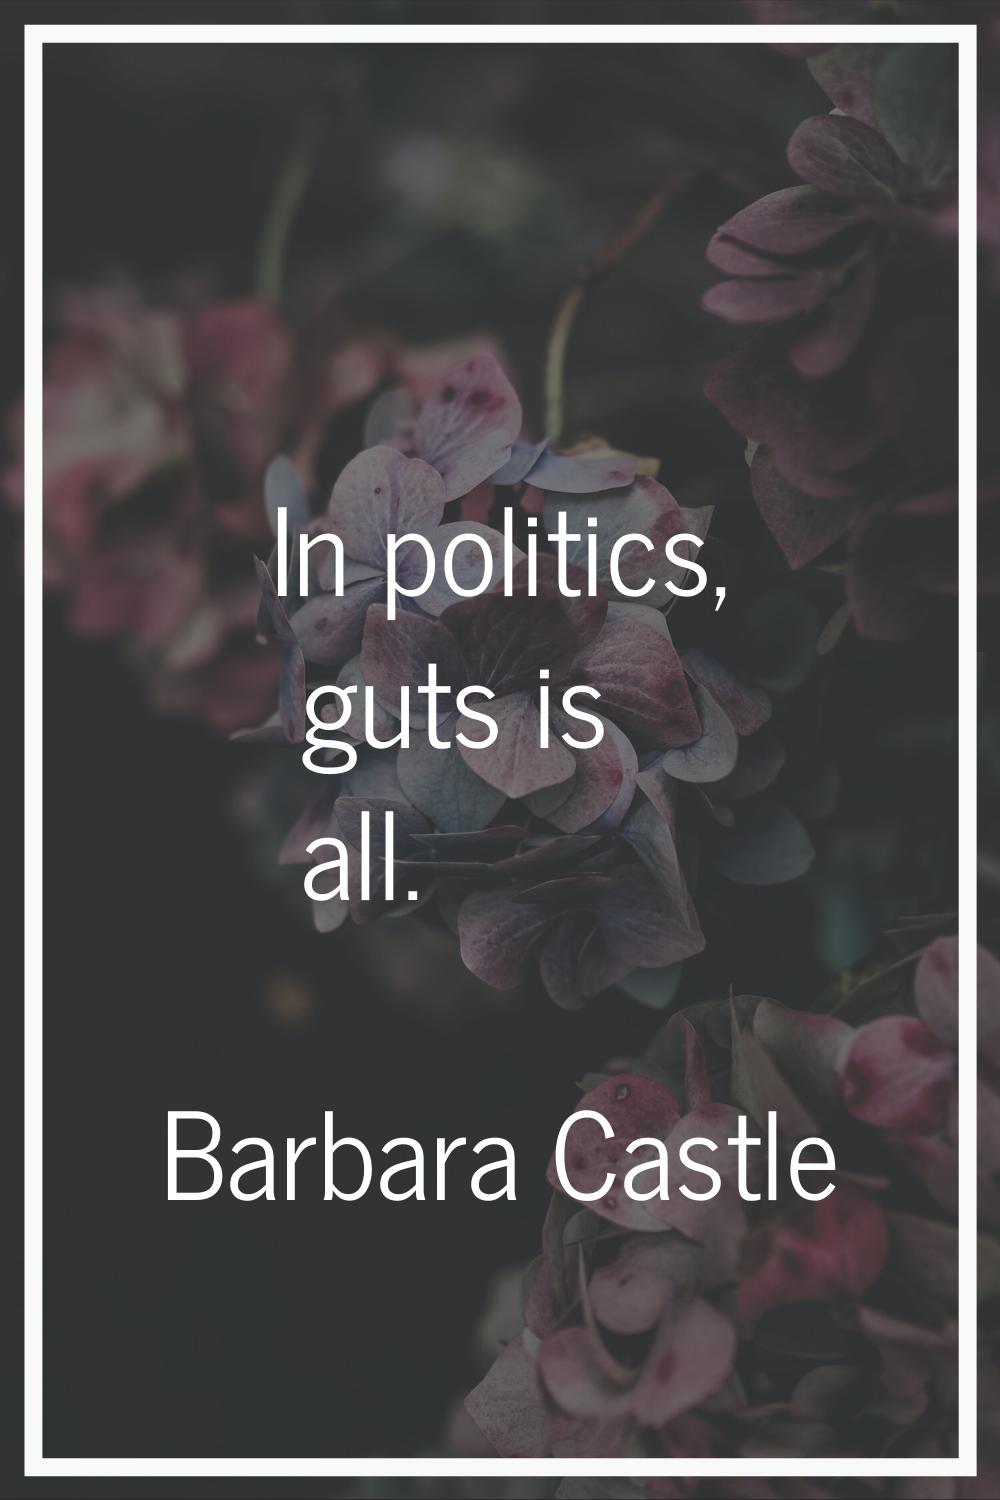 In politics, guts is all.